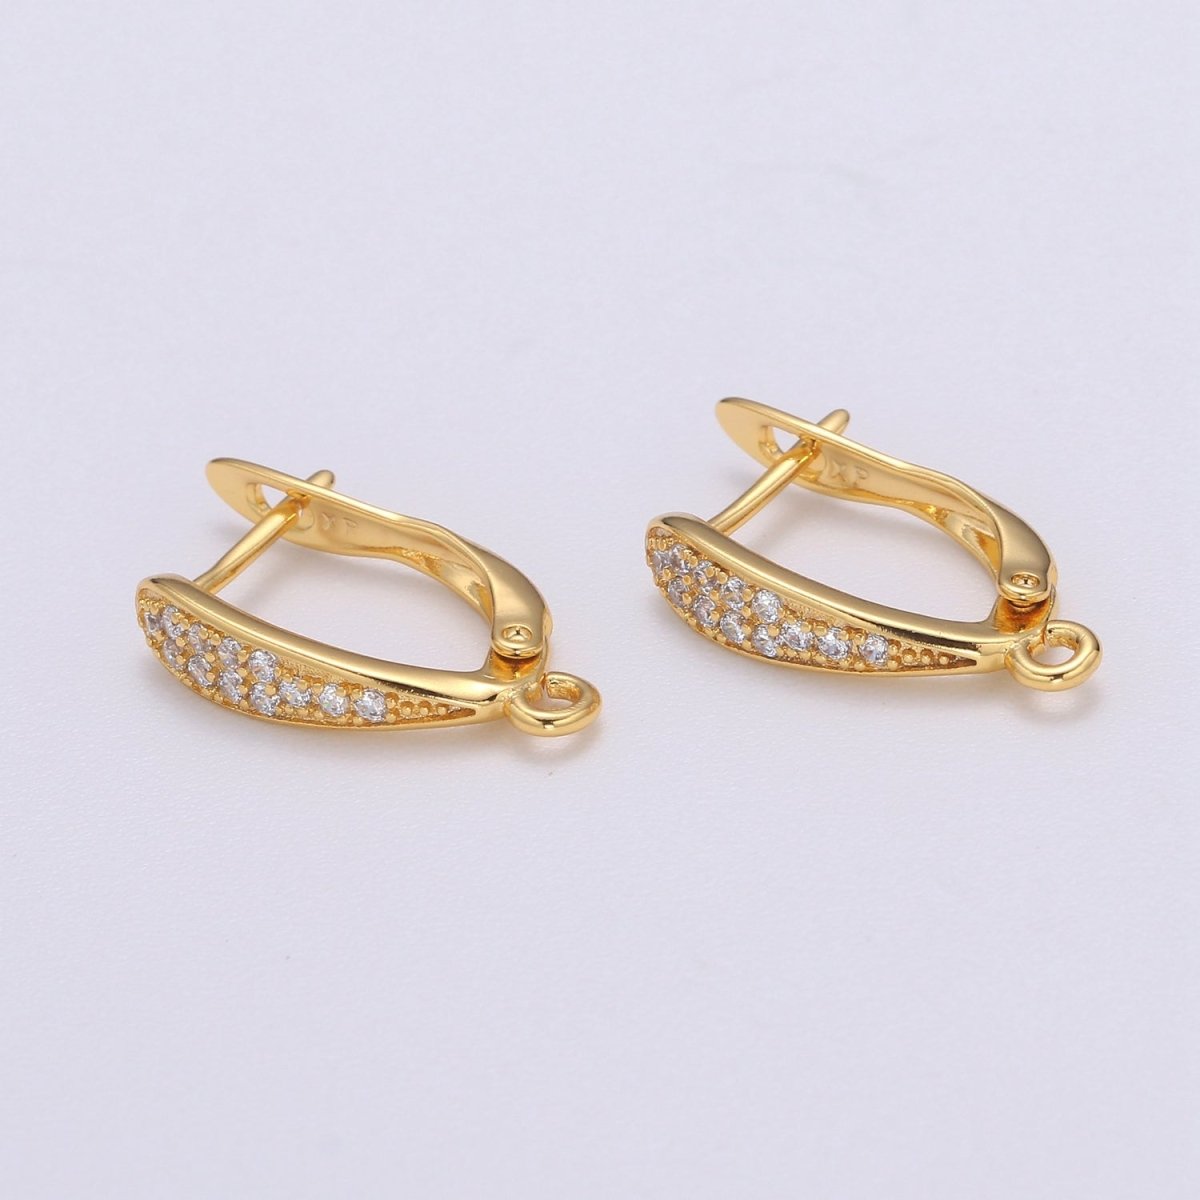 U Shaped Huggie Earring 24K Gold Filled Cz Micro Pave Hoops with open link for Jewelry Making Supply L-230 - DLUXCA